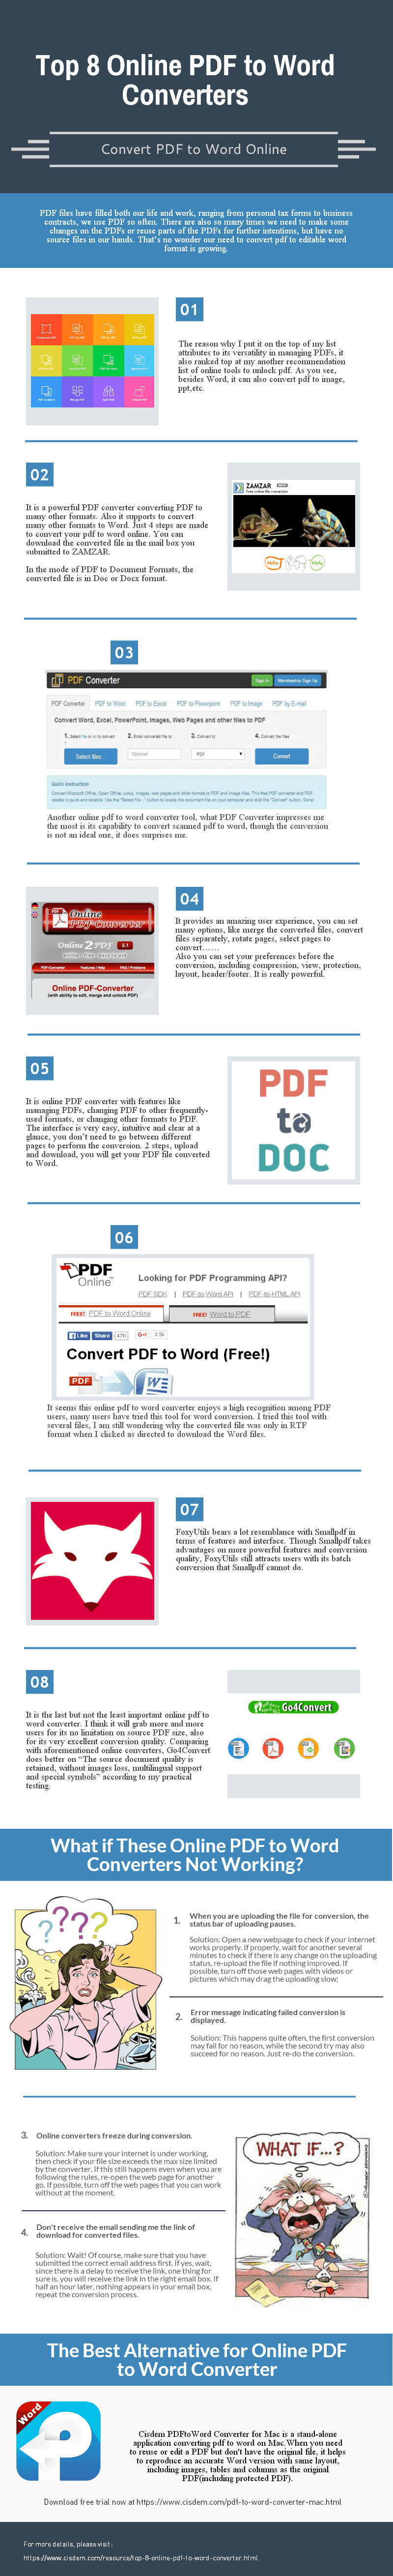 online pdf to word converters